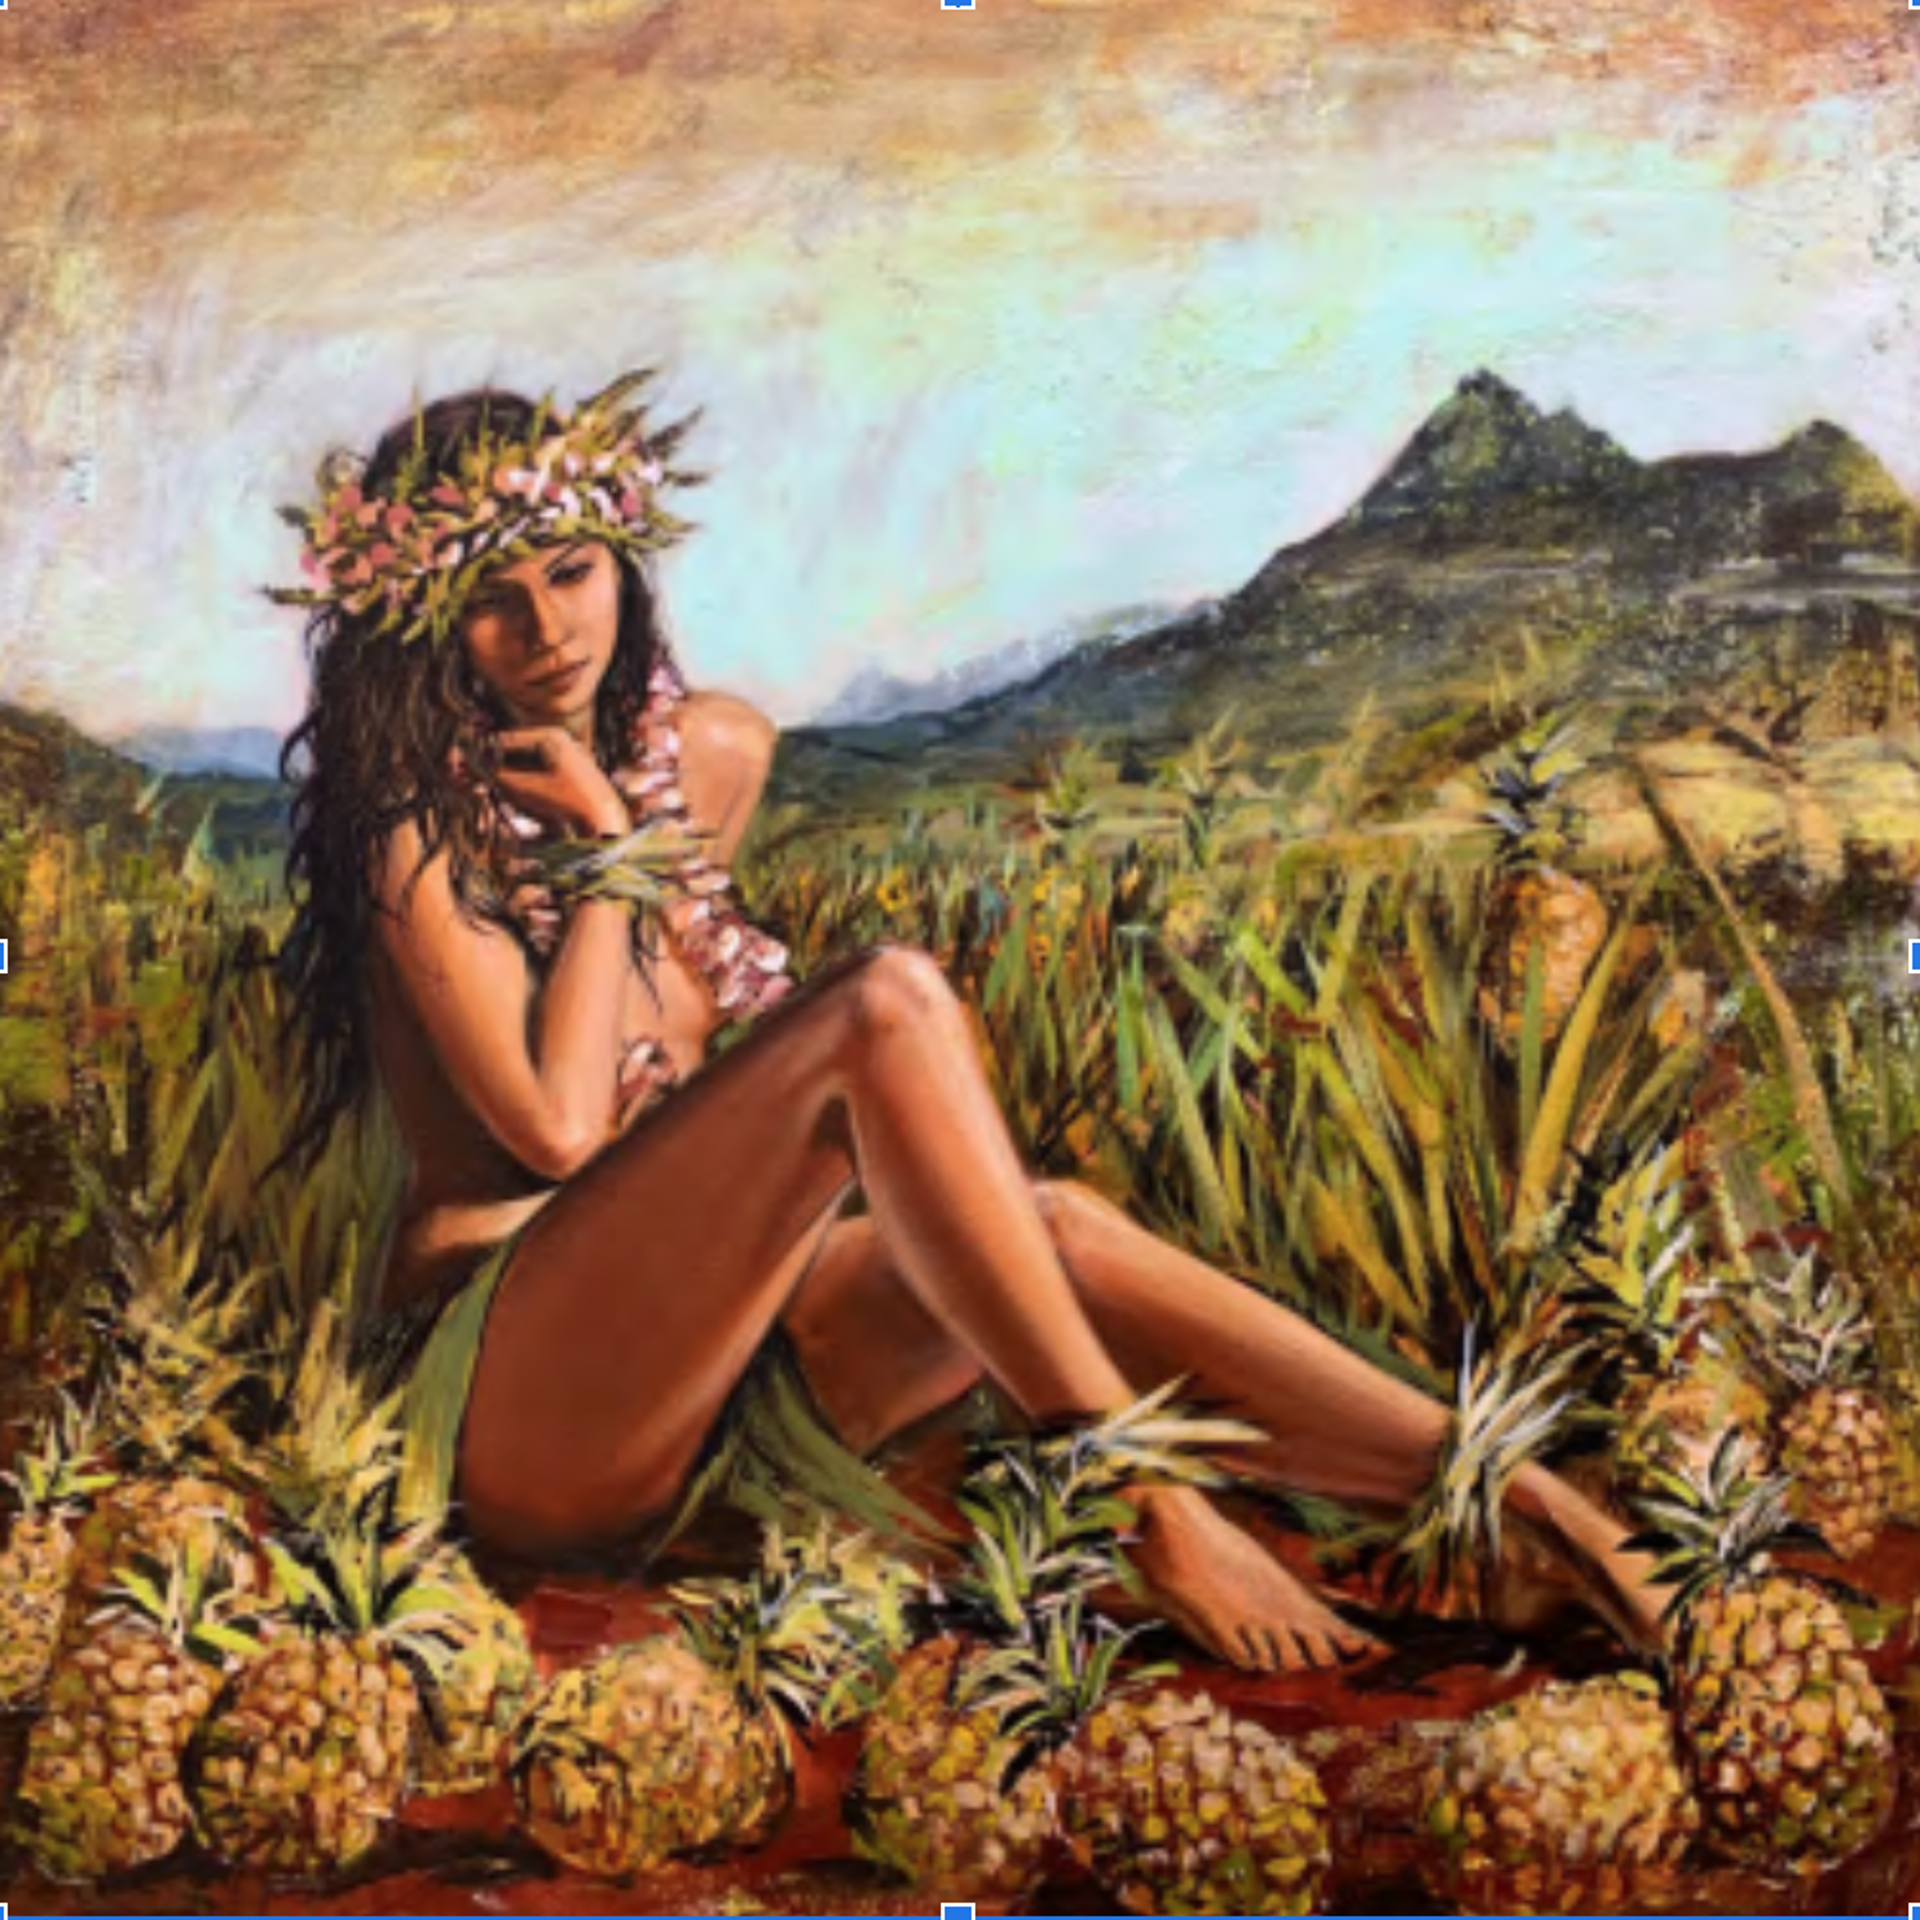 Pineapple Fields Forever by Shawn Mackey